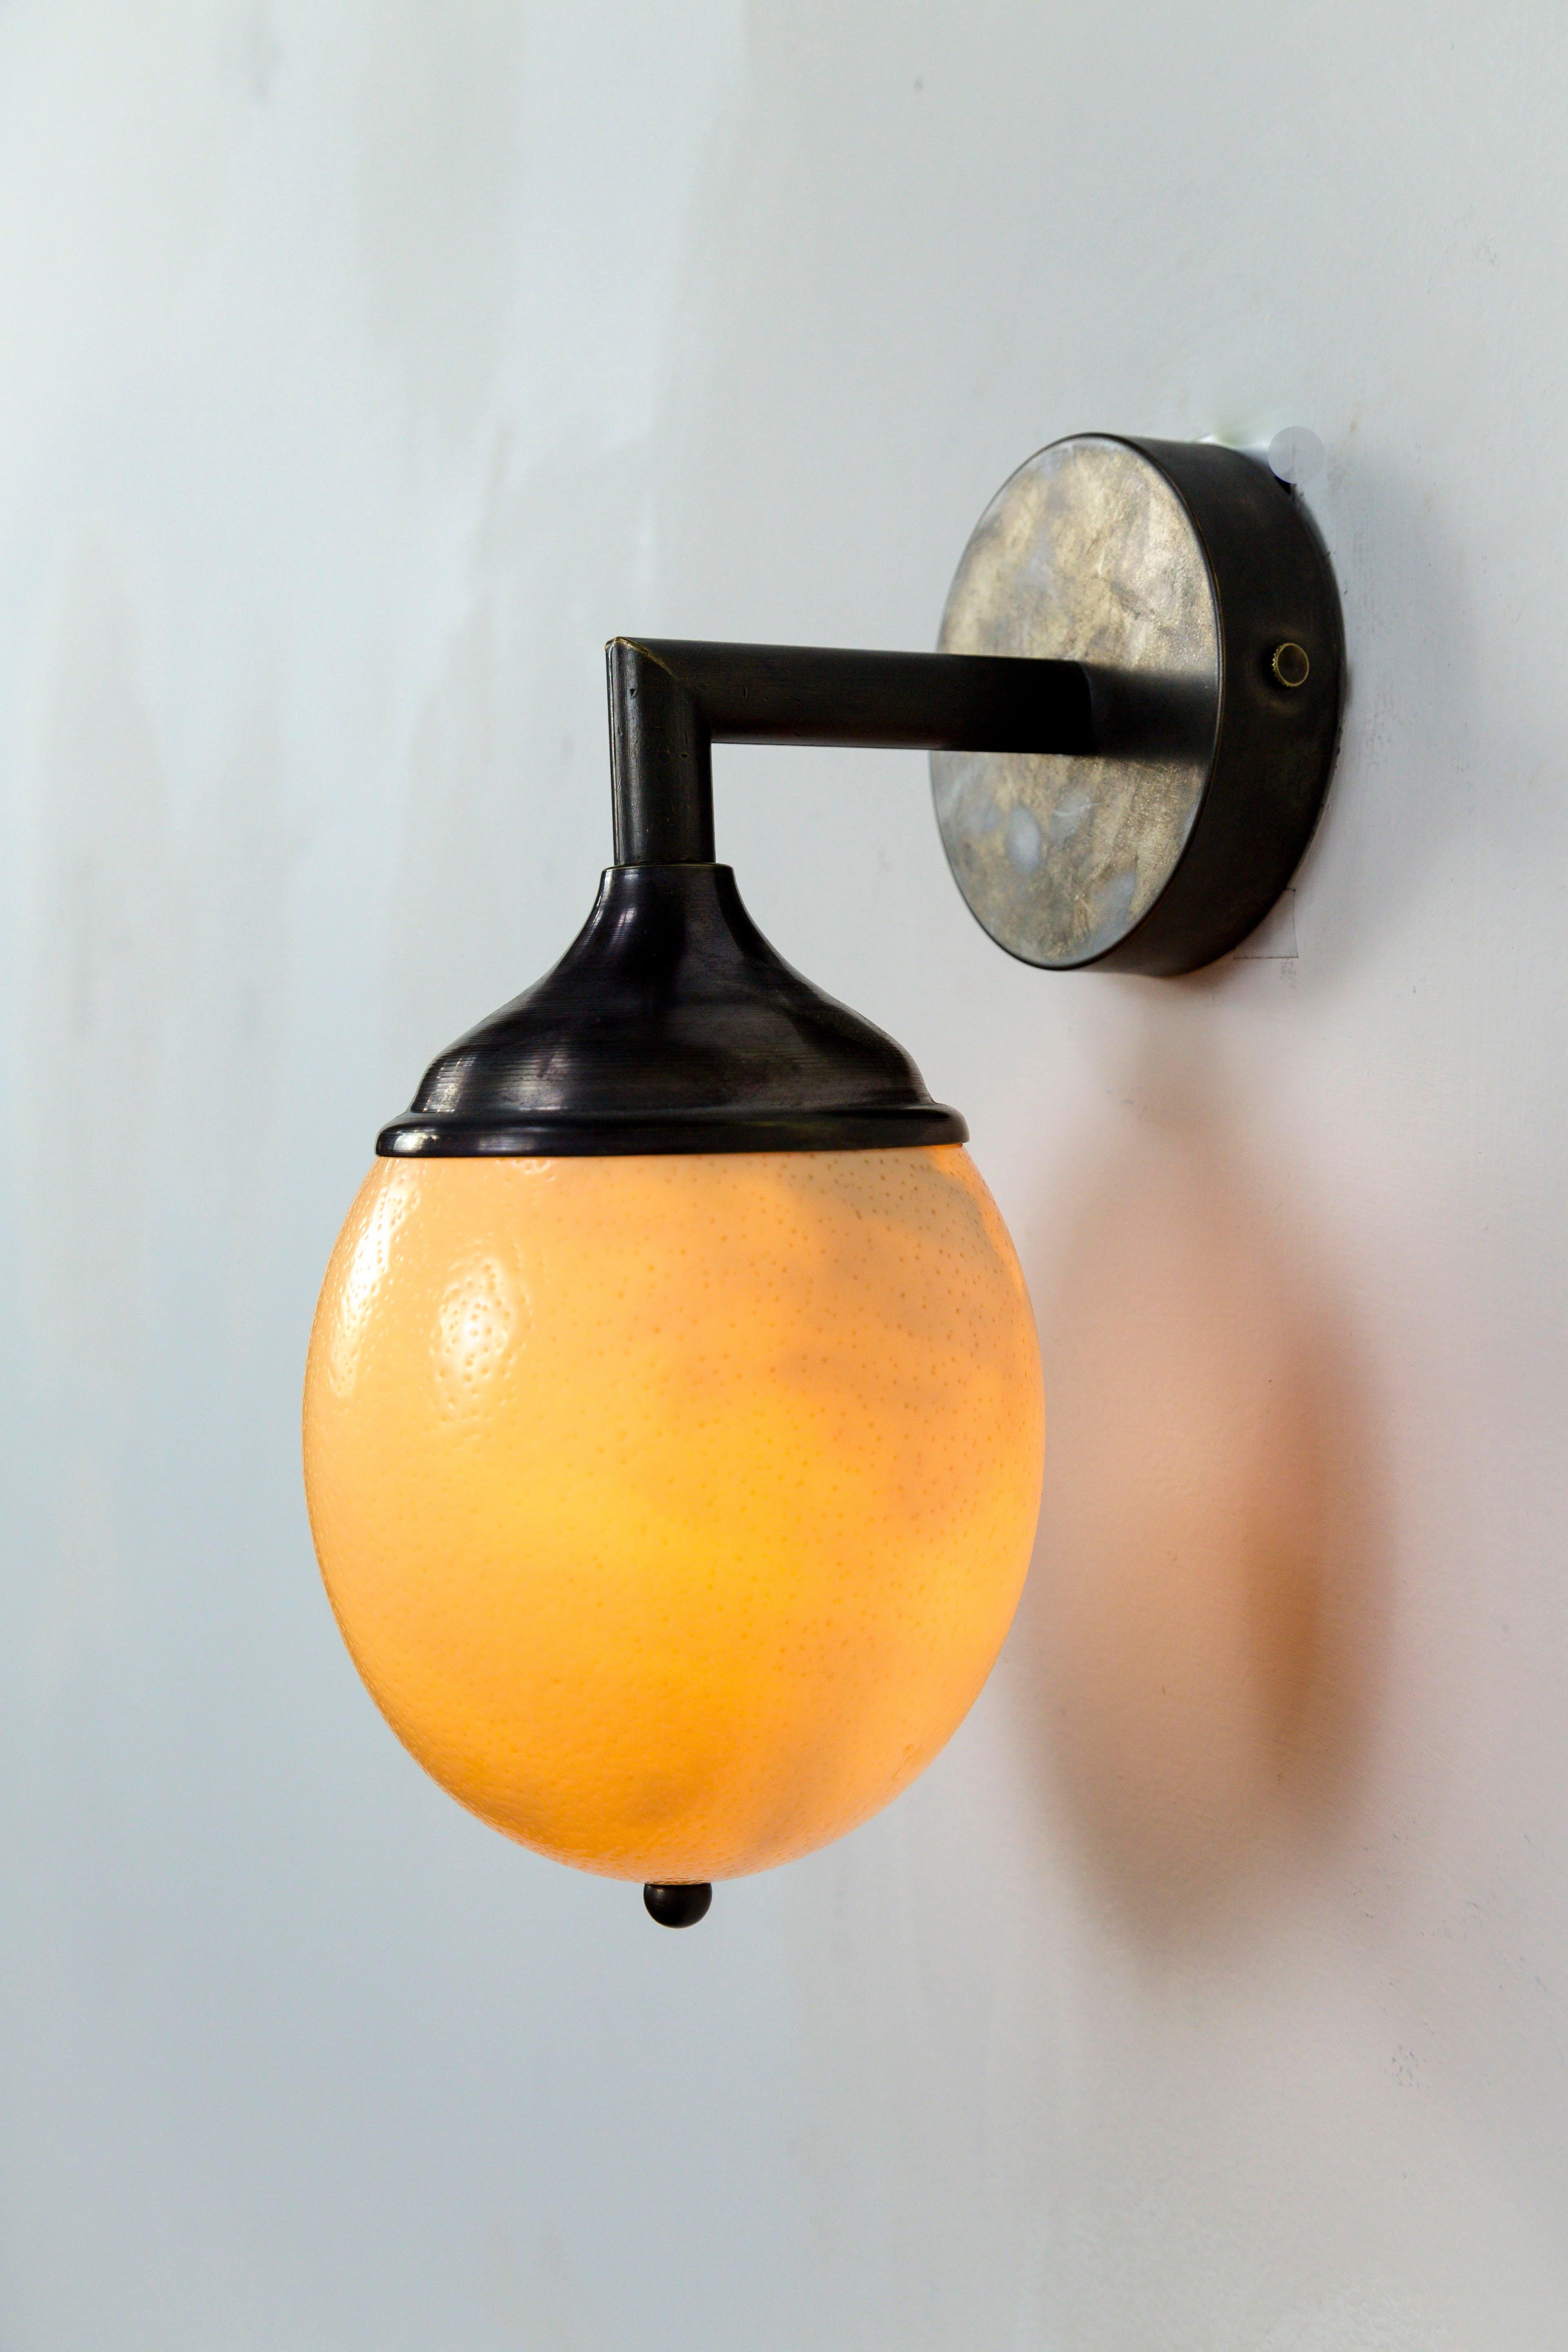 We used this pristine Ostrich egg with a beautiful texture to compose this wall lamp with a cast brass arm, backplate, and shade cover in an oil rubbed bronze finish. This fixture a has a rich, bone color that varies to a warm, flame-like glow when